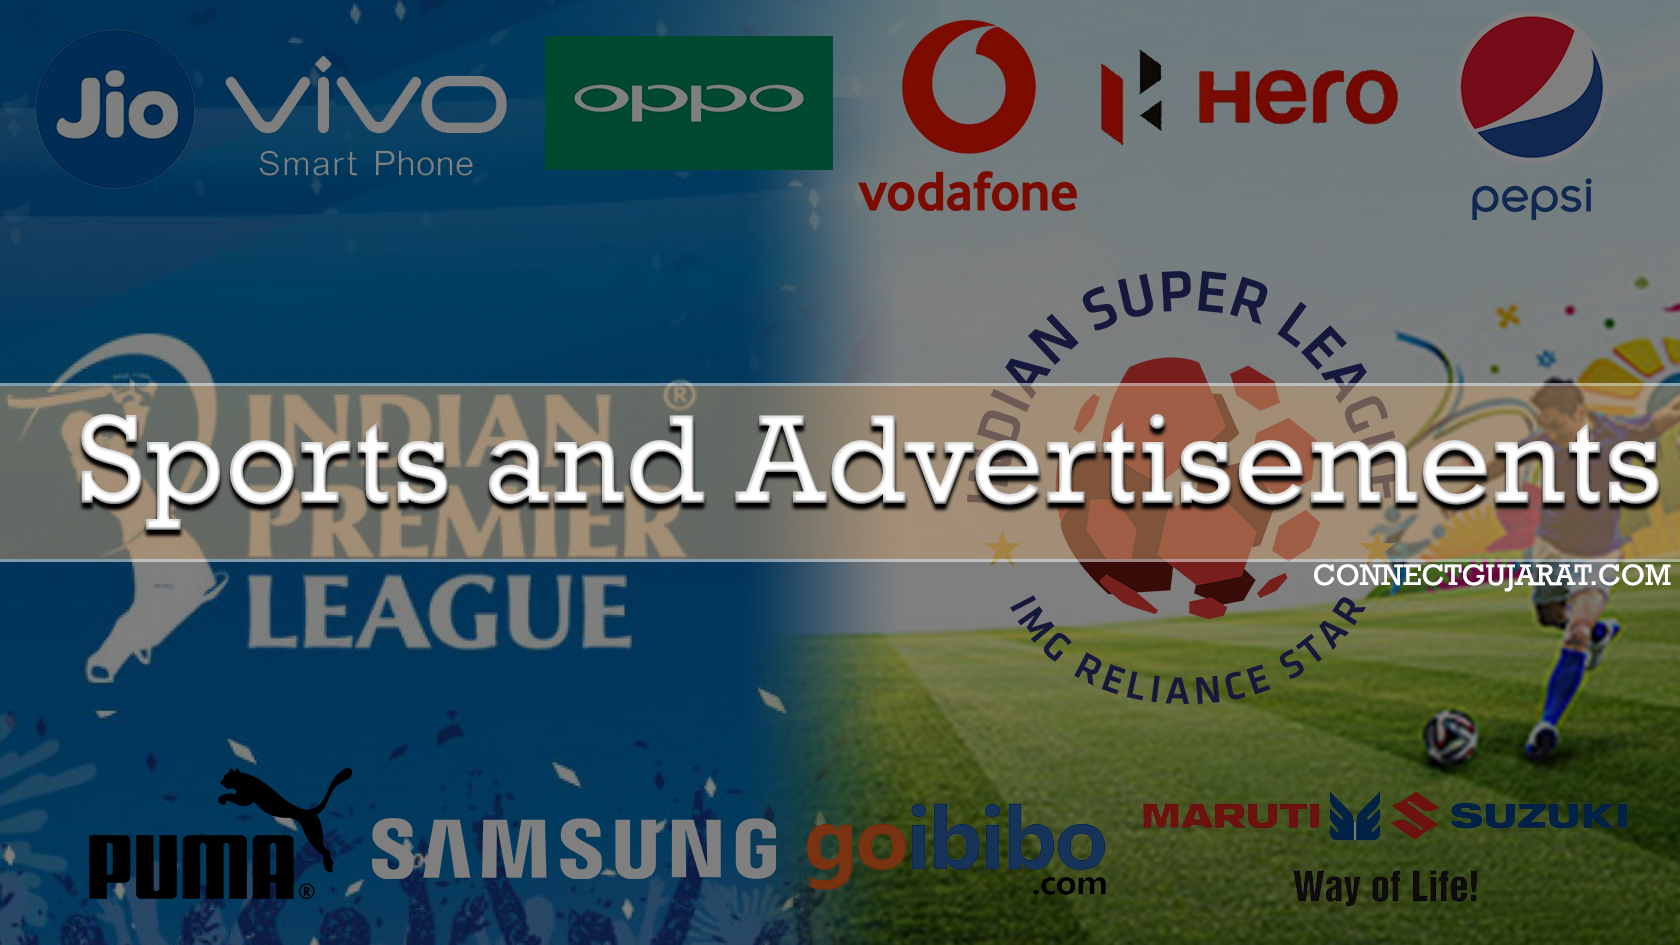 Sports and advertisements hand in hand